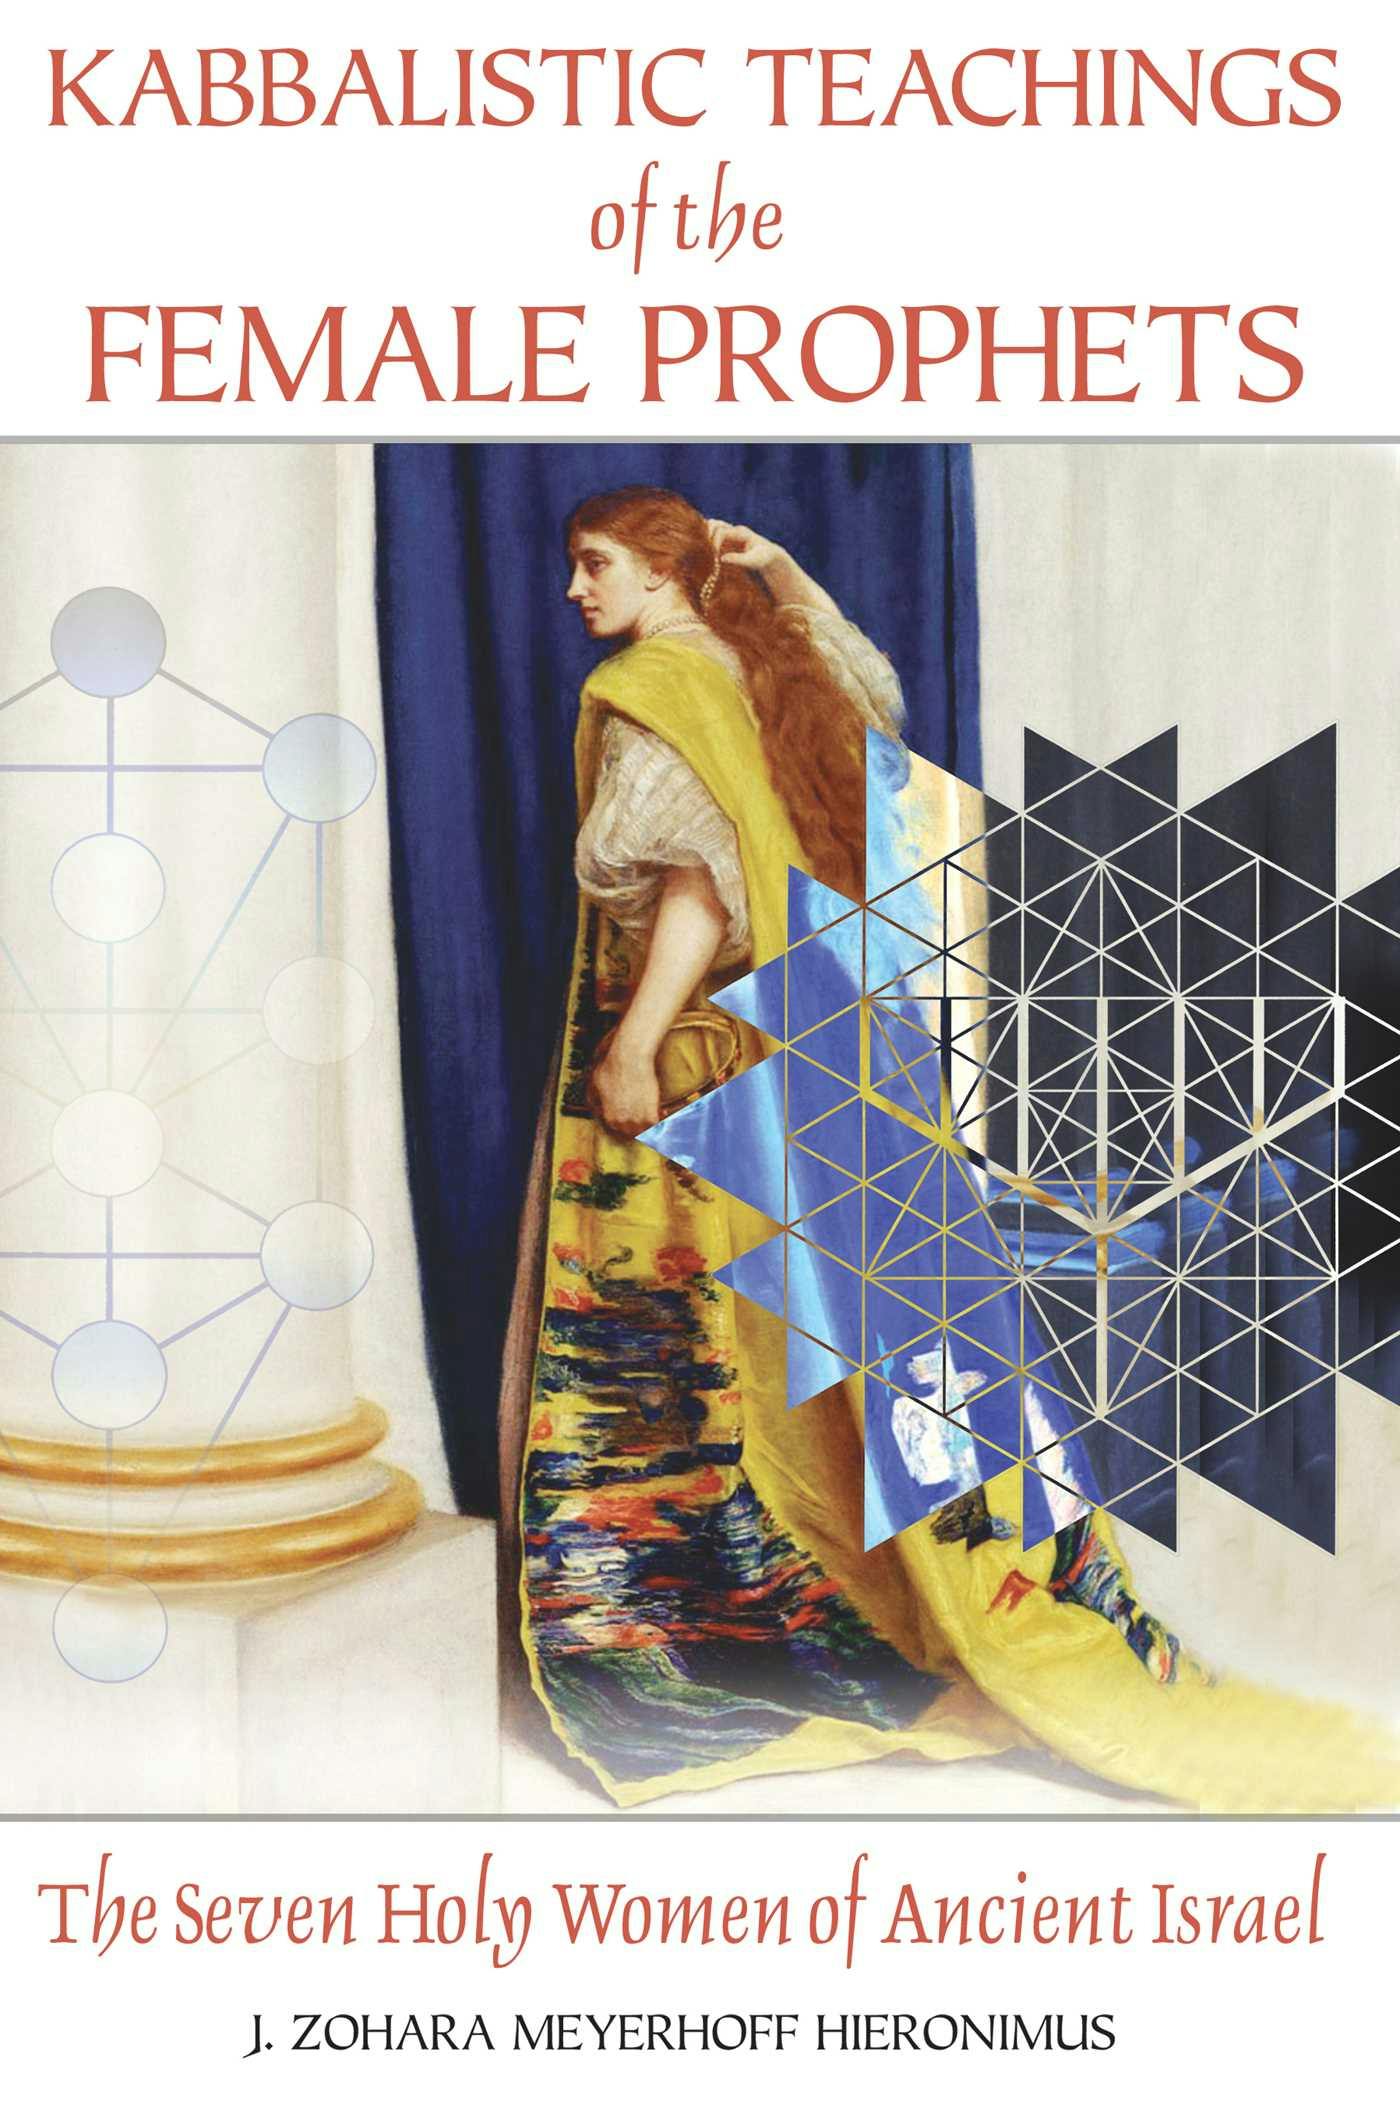 Kabbalistic Teachings of the Female Prophets: The Seven Holy Women of Ancient Israel - J. Zohara Meyerhoff Hieronimus